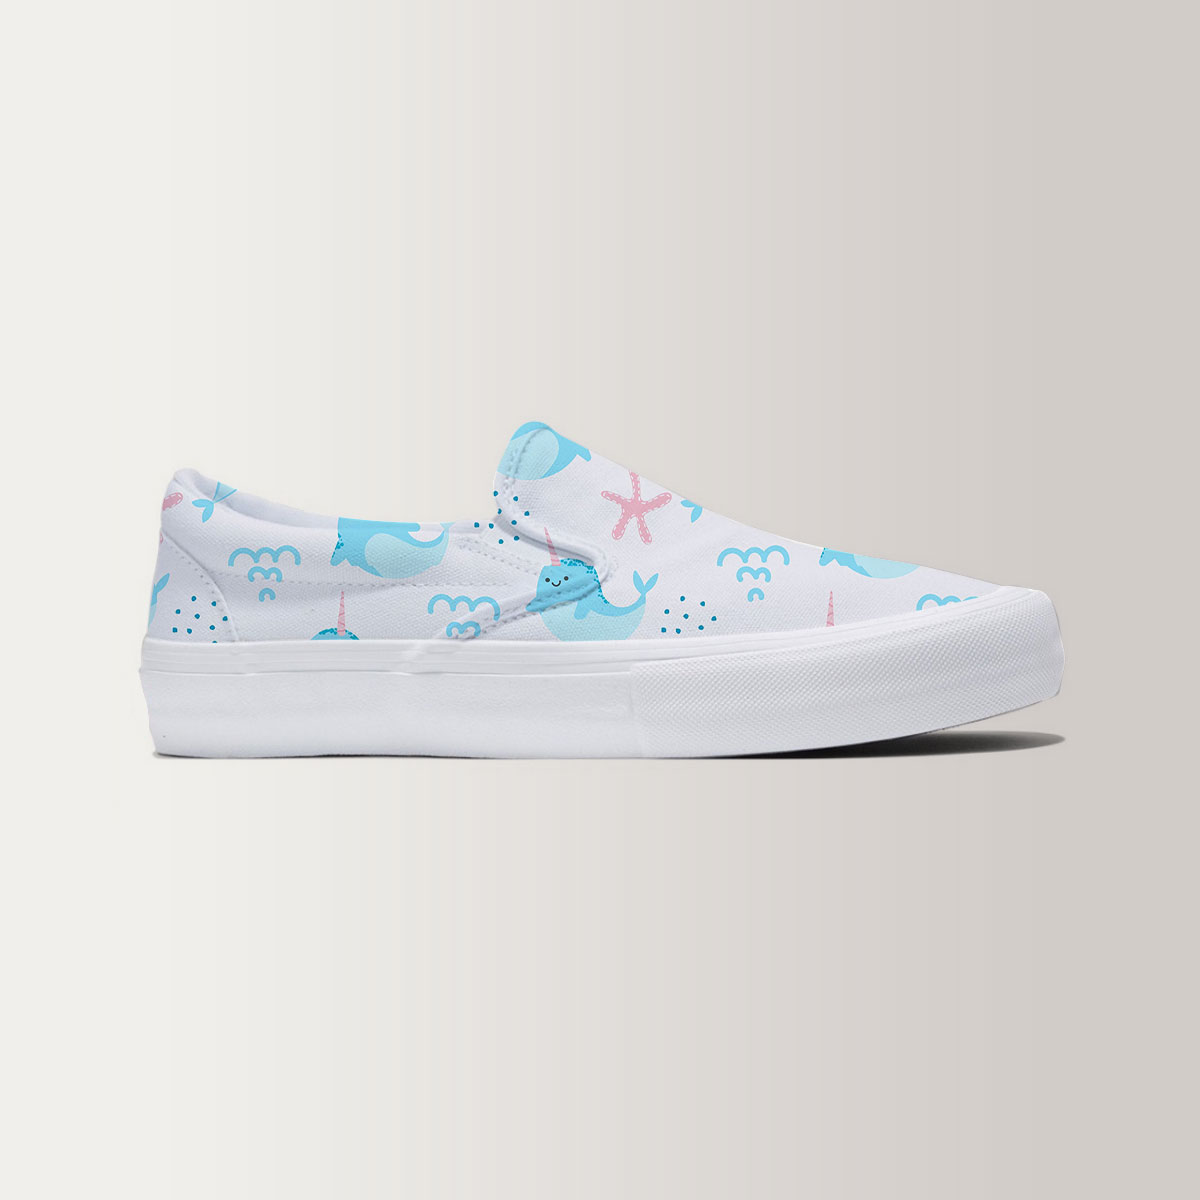 Cartoon Adorable Narwhal Slip On Sneakers